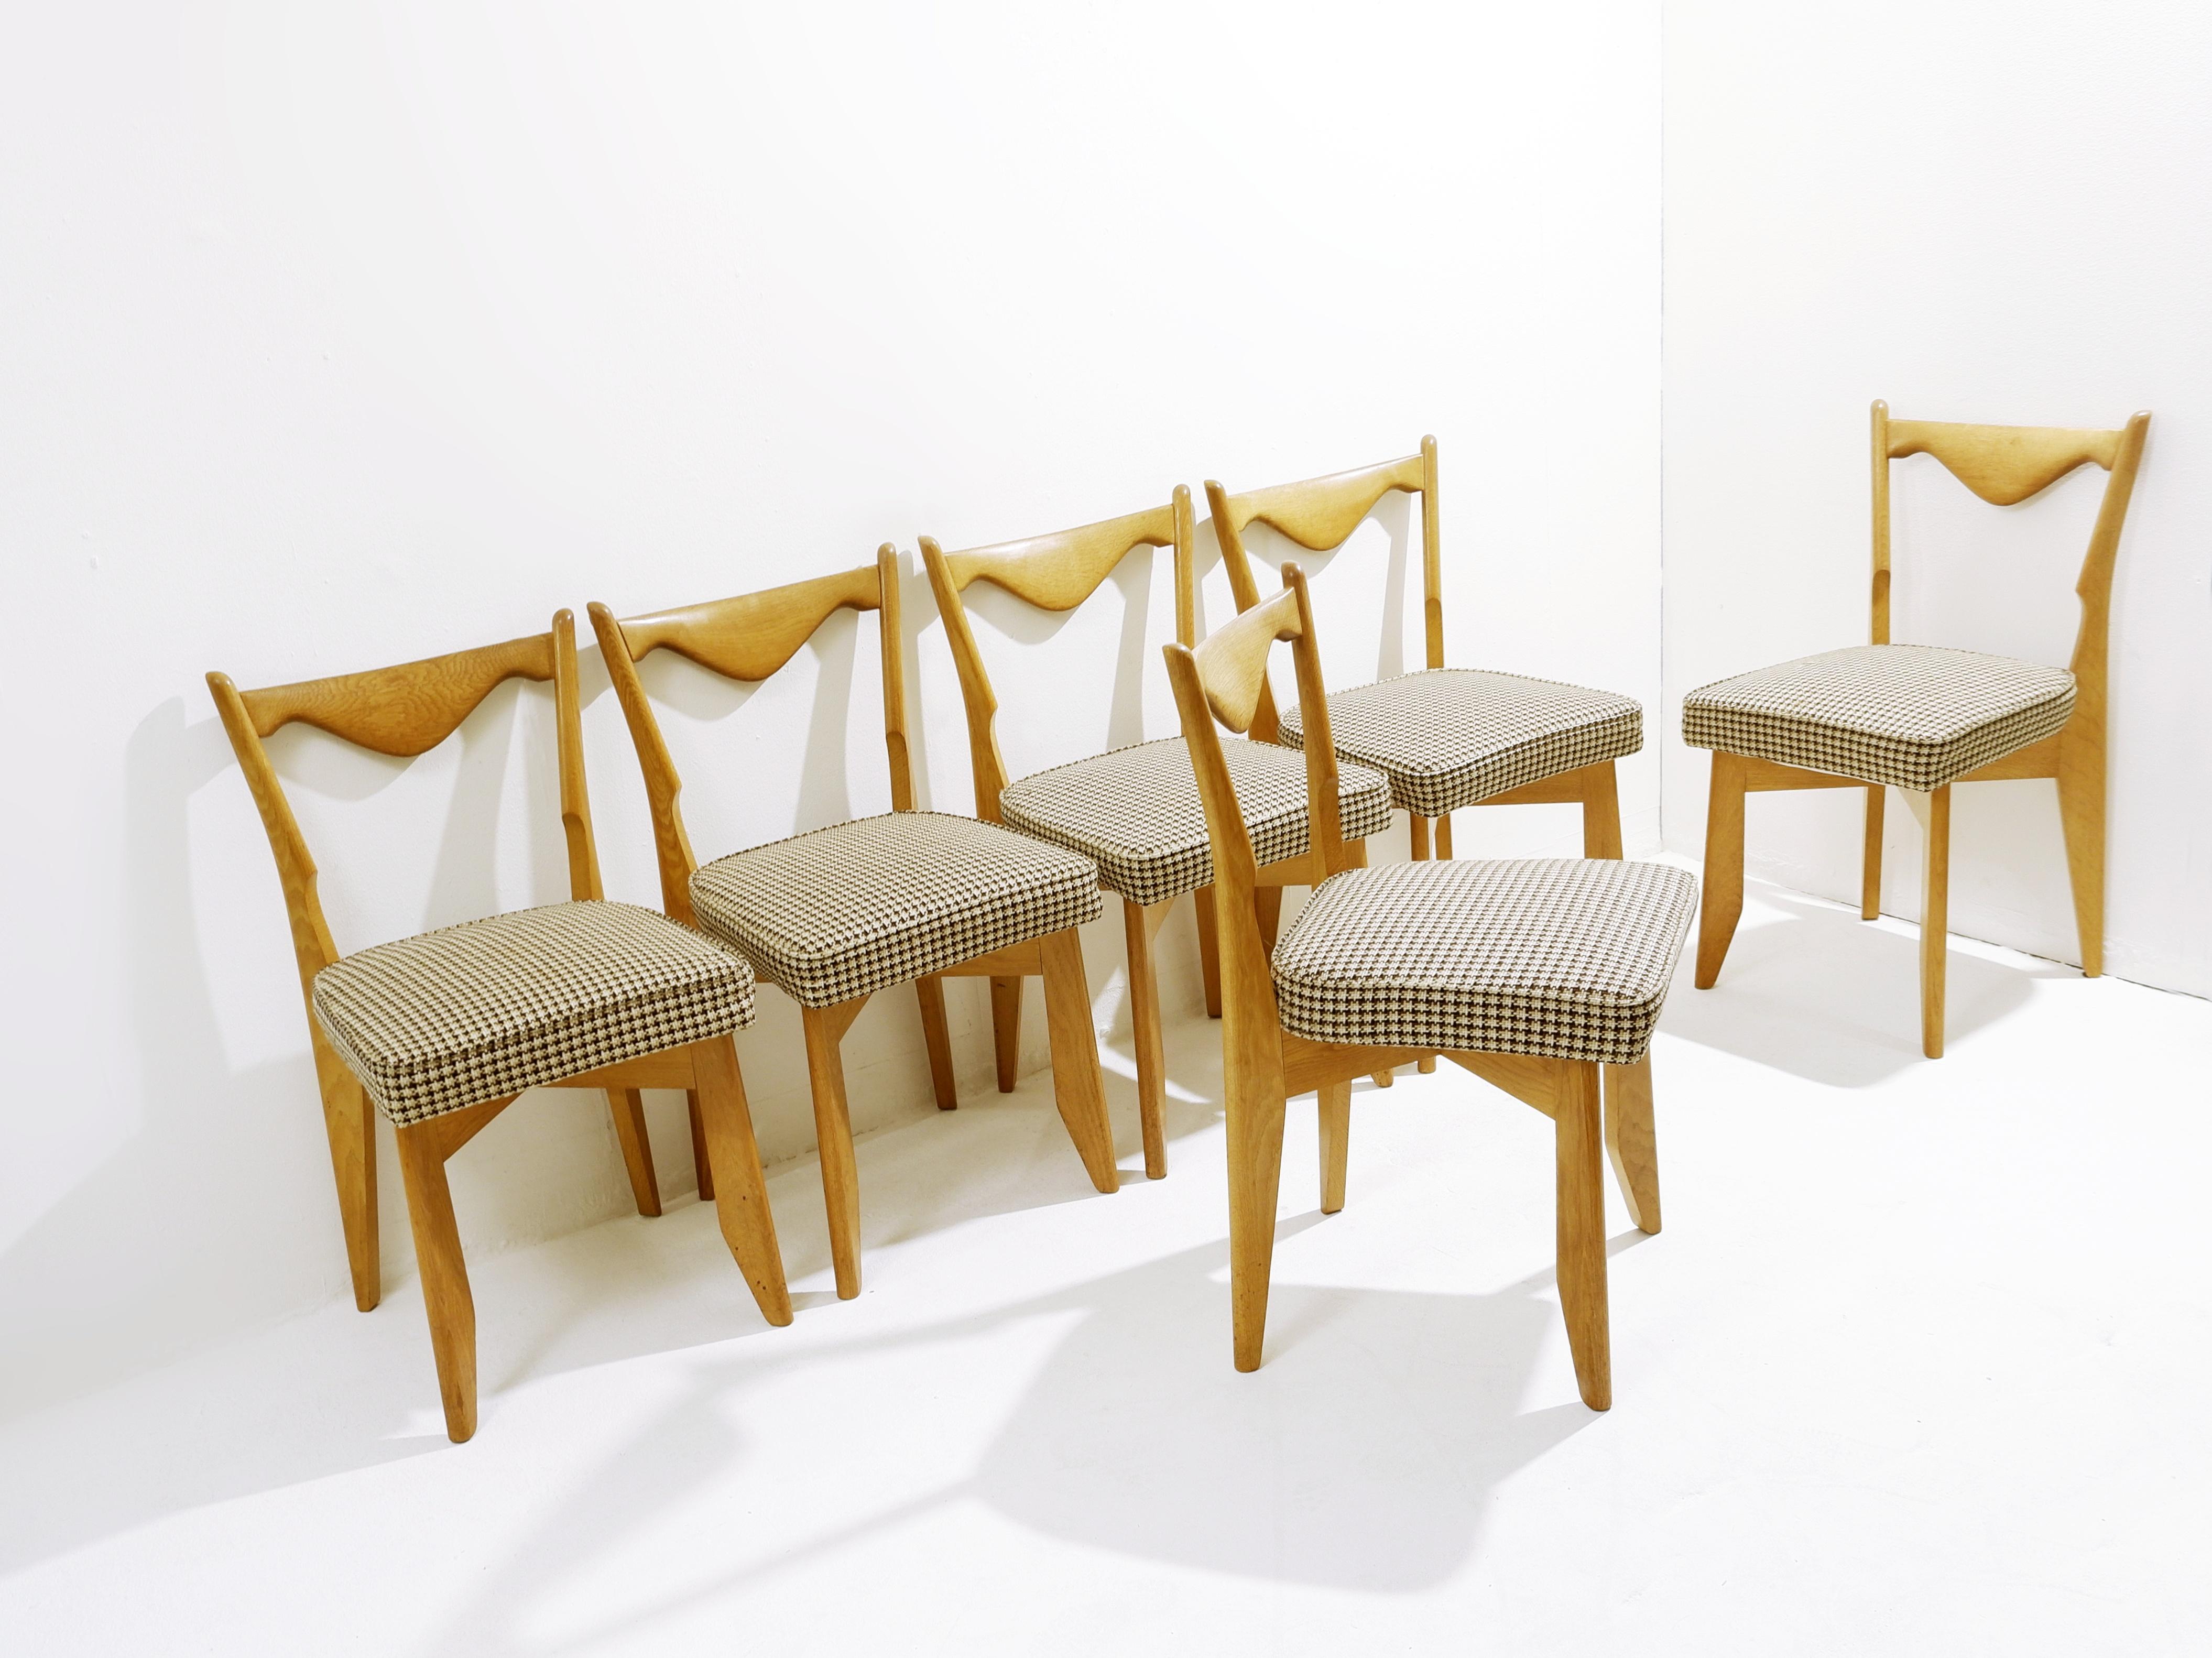 Mid-century chairs by Guillerme & Chambron for votre maison - set of 6 - France 1960s - original upholstery.